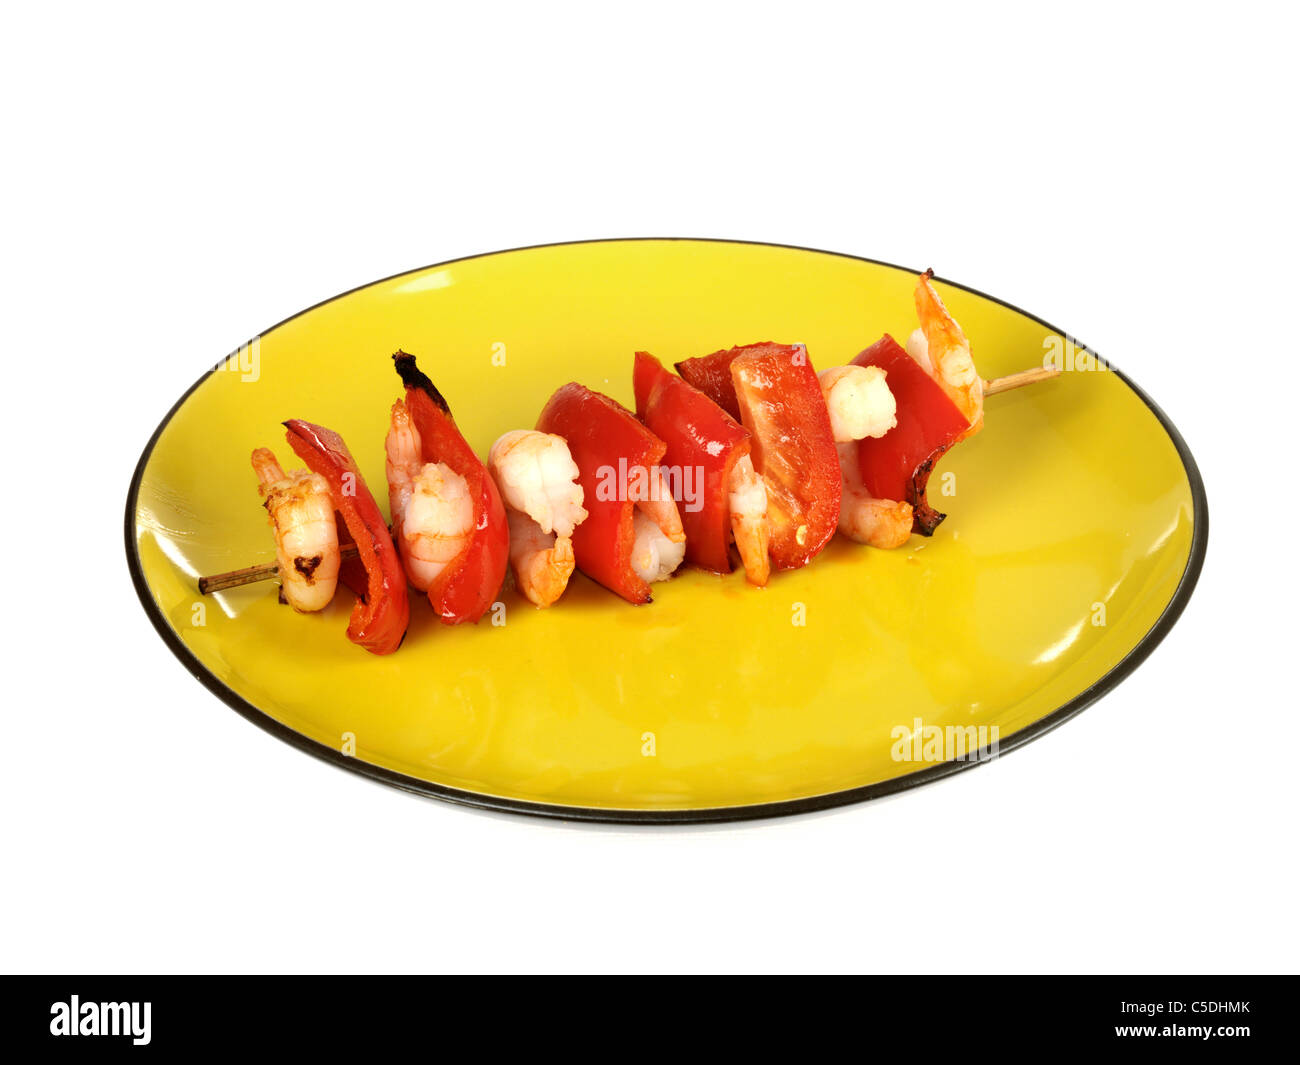 King prawn and pepper kebab Banque D'Images